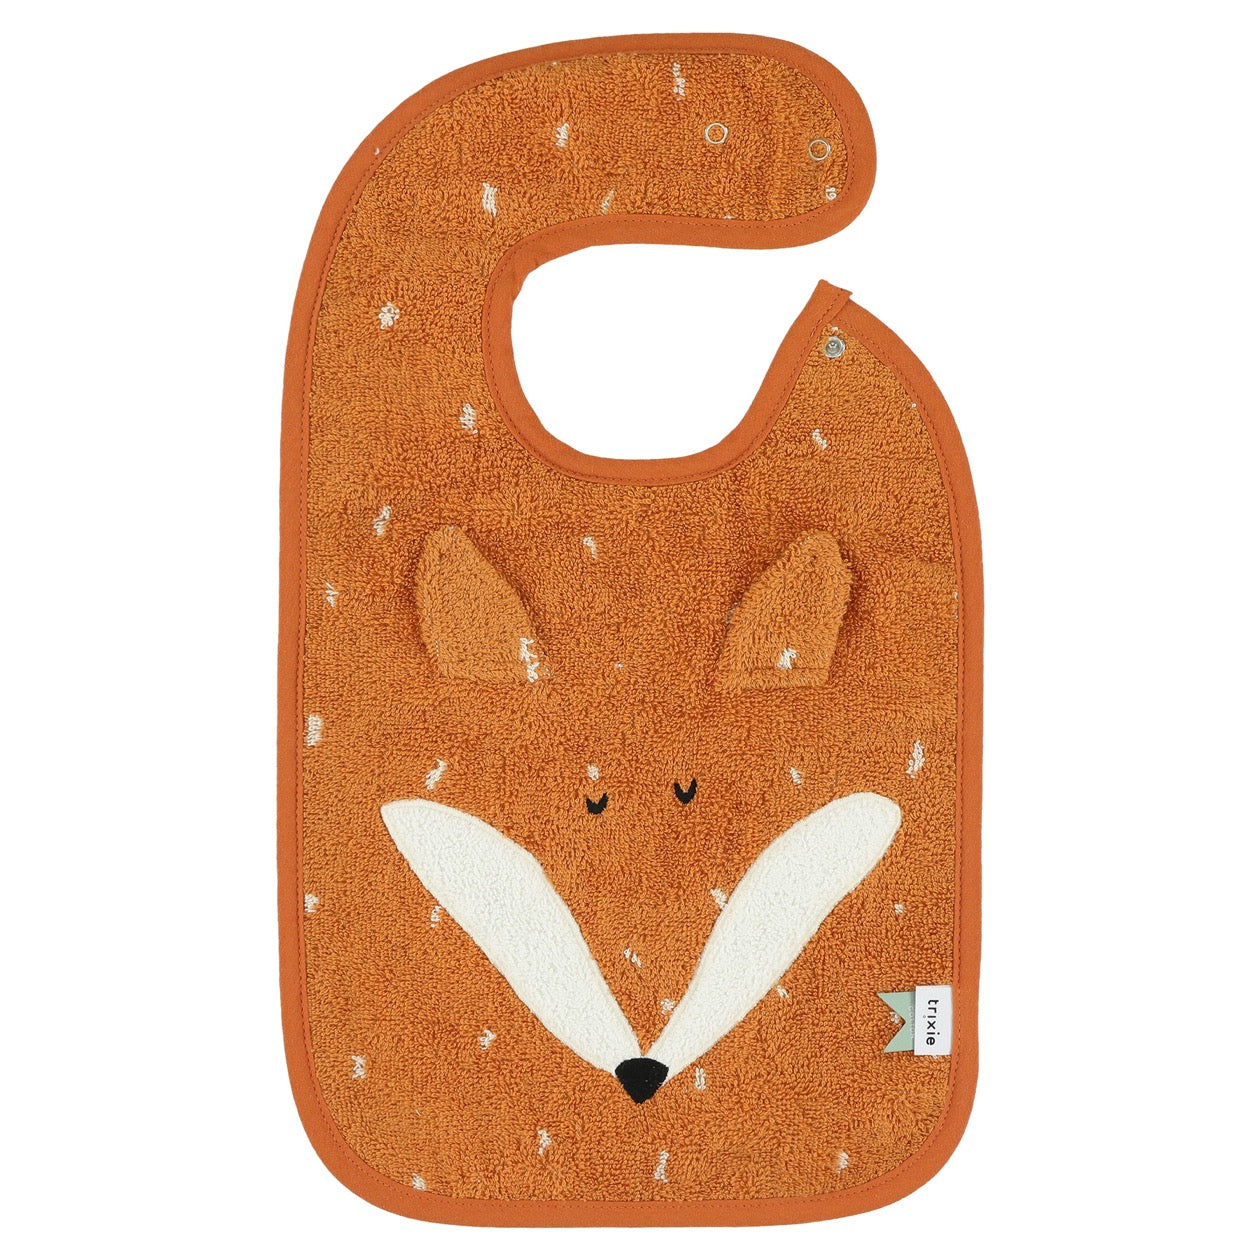 Orange bib with a fox face and ears